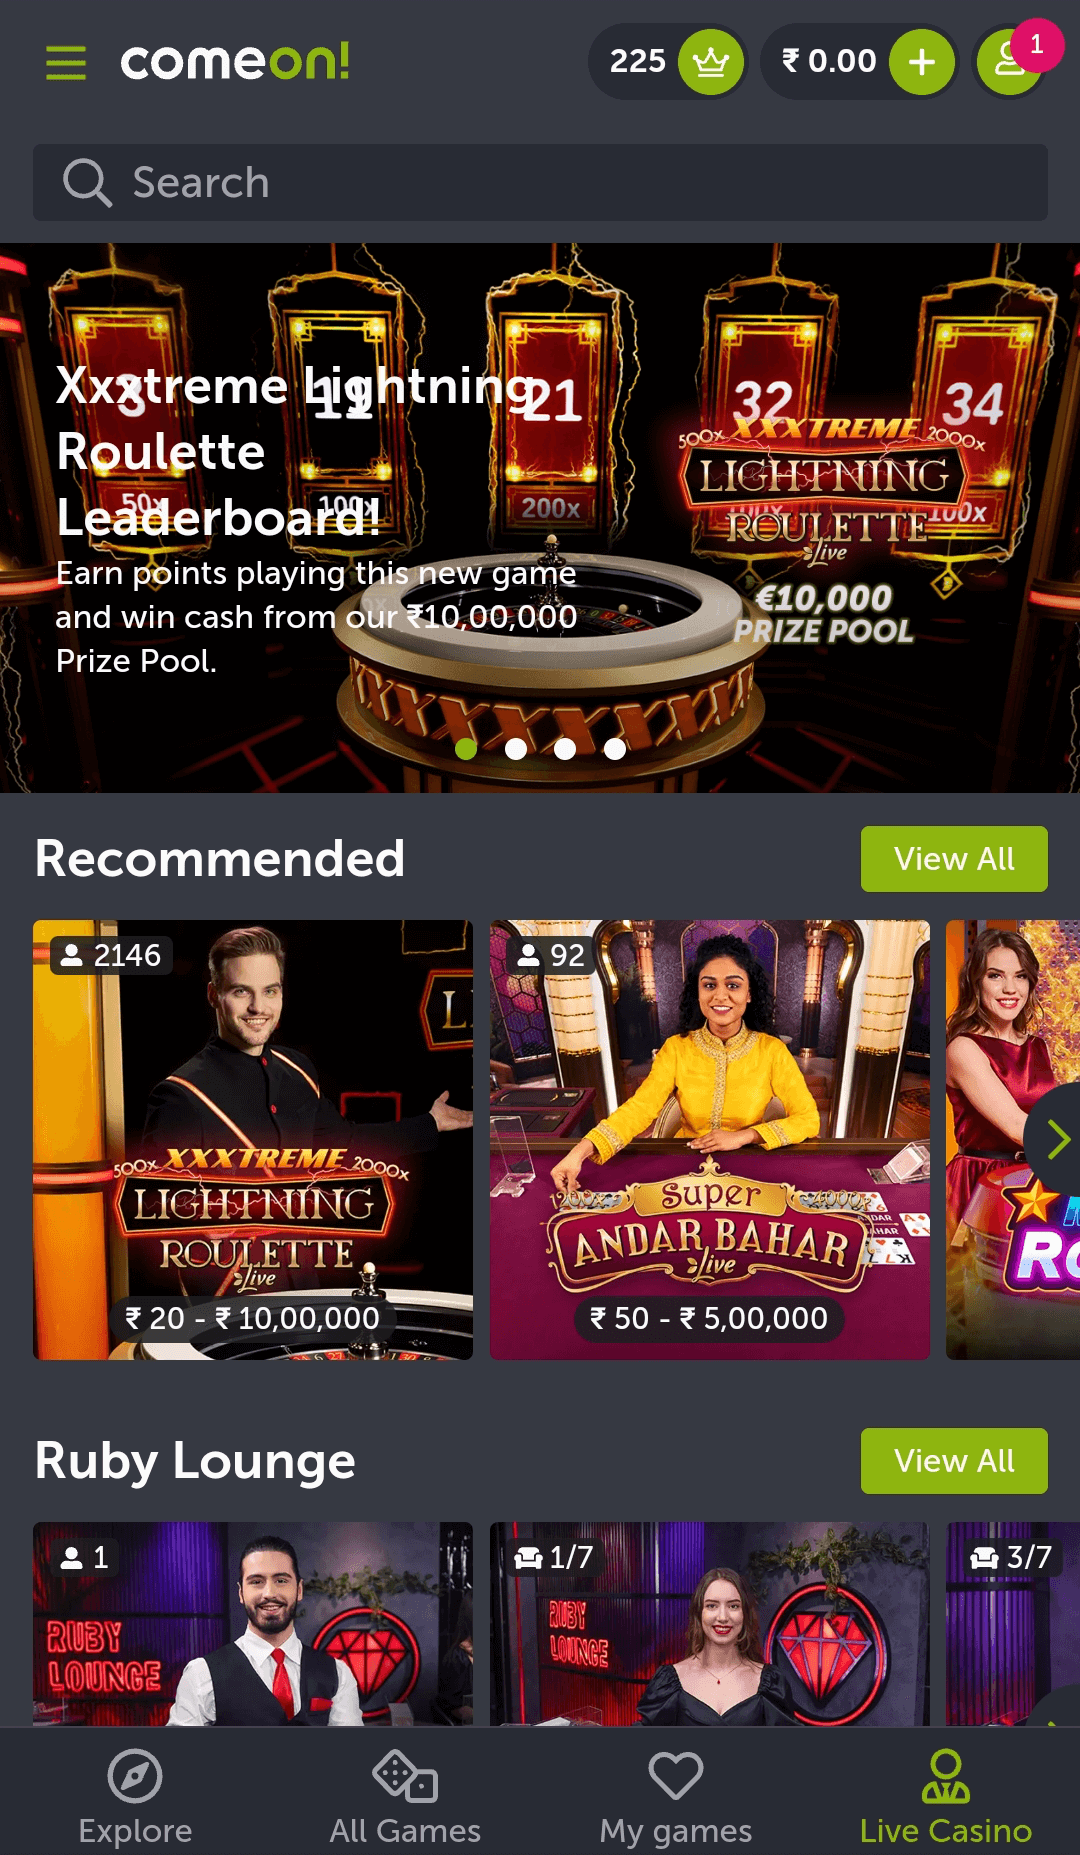 Live-casino with real dealers in the ComeOn app